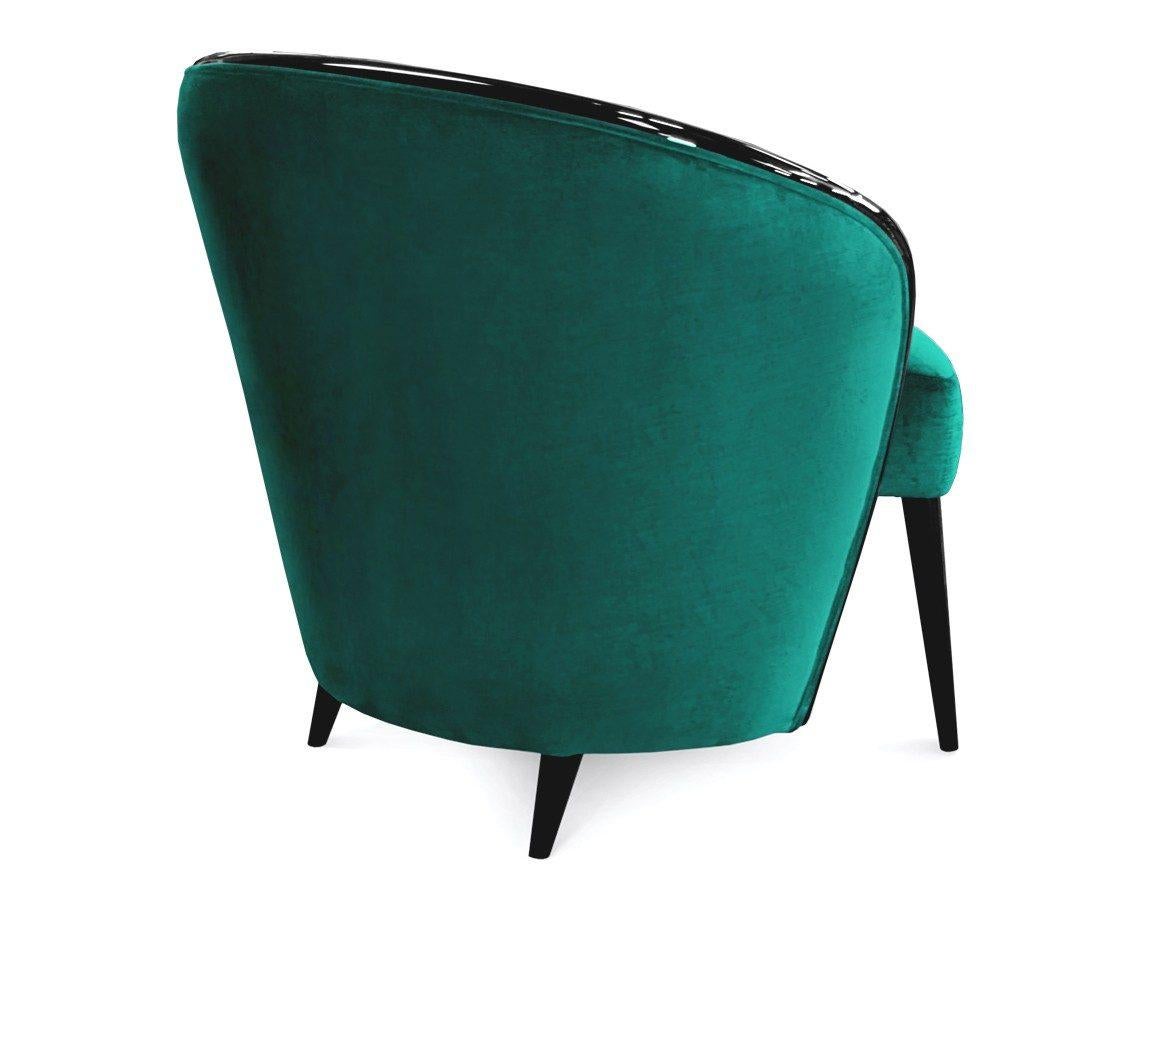 The armchair forms of a series of curved shapes with backrest wrapping around the center of the piece to form a gown that covers the armchair. 
High gloss lacquered wood in black or any RAL color. 
Upholstered in Emerald green cotton